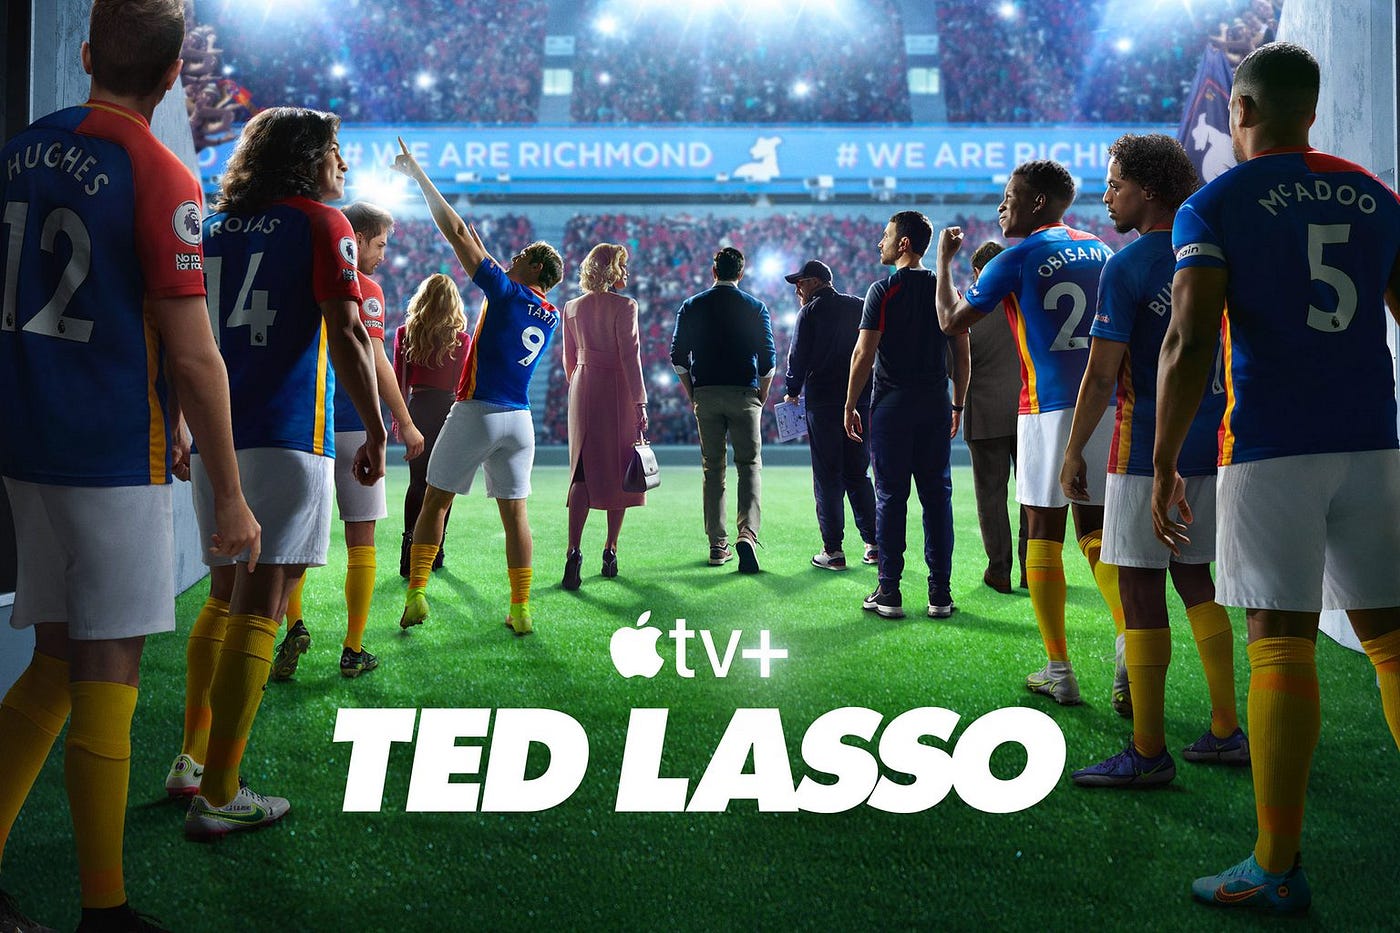 New 'Ted Lasso' teammate Zava is based on what real player?